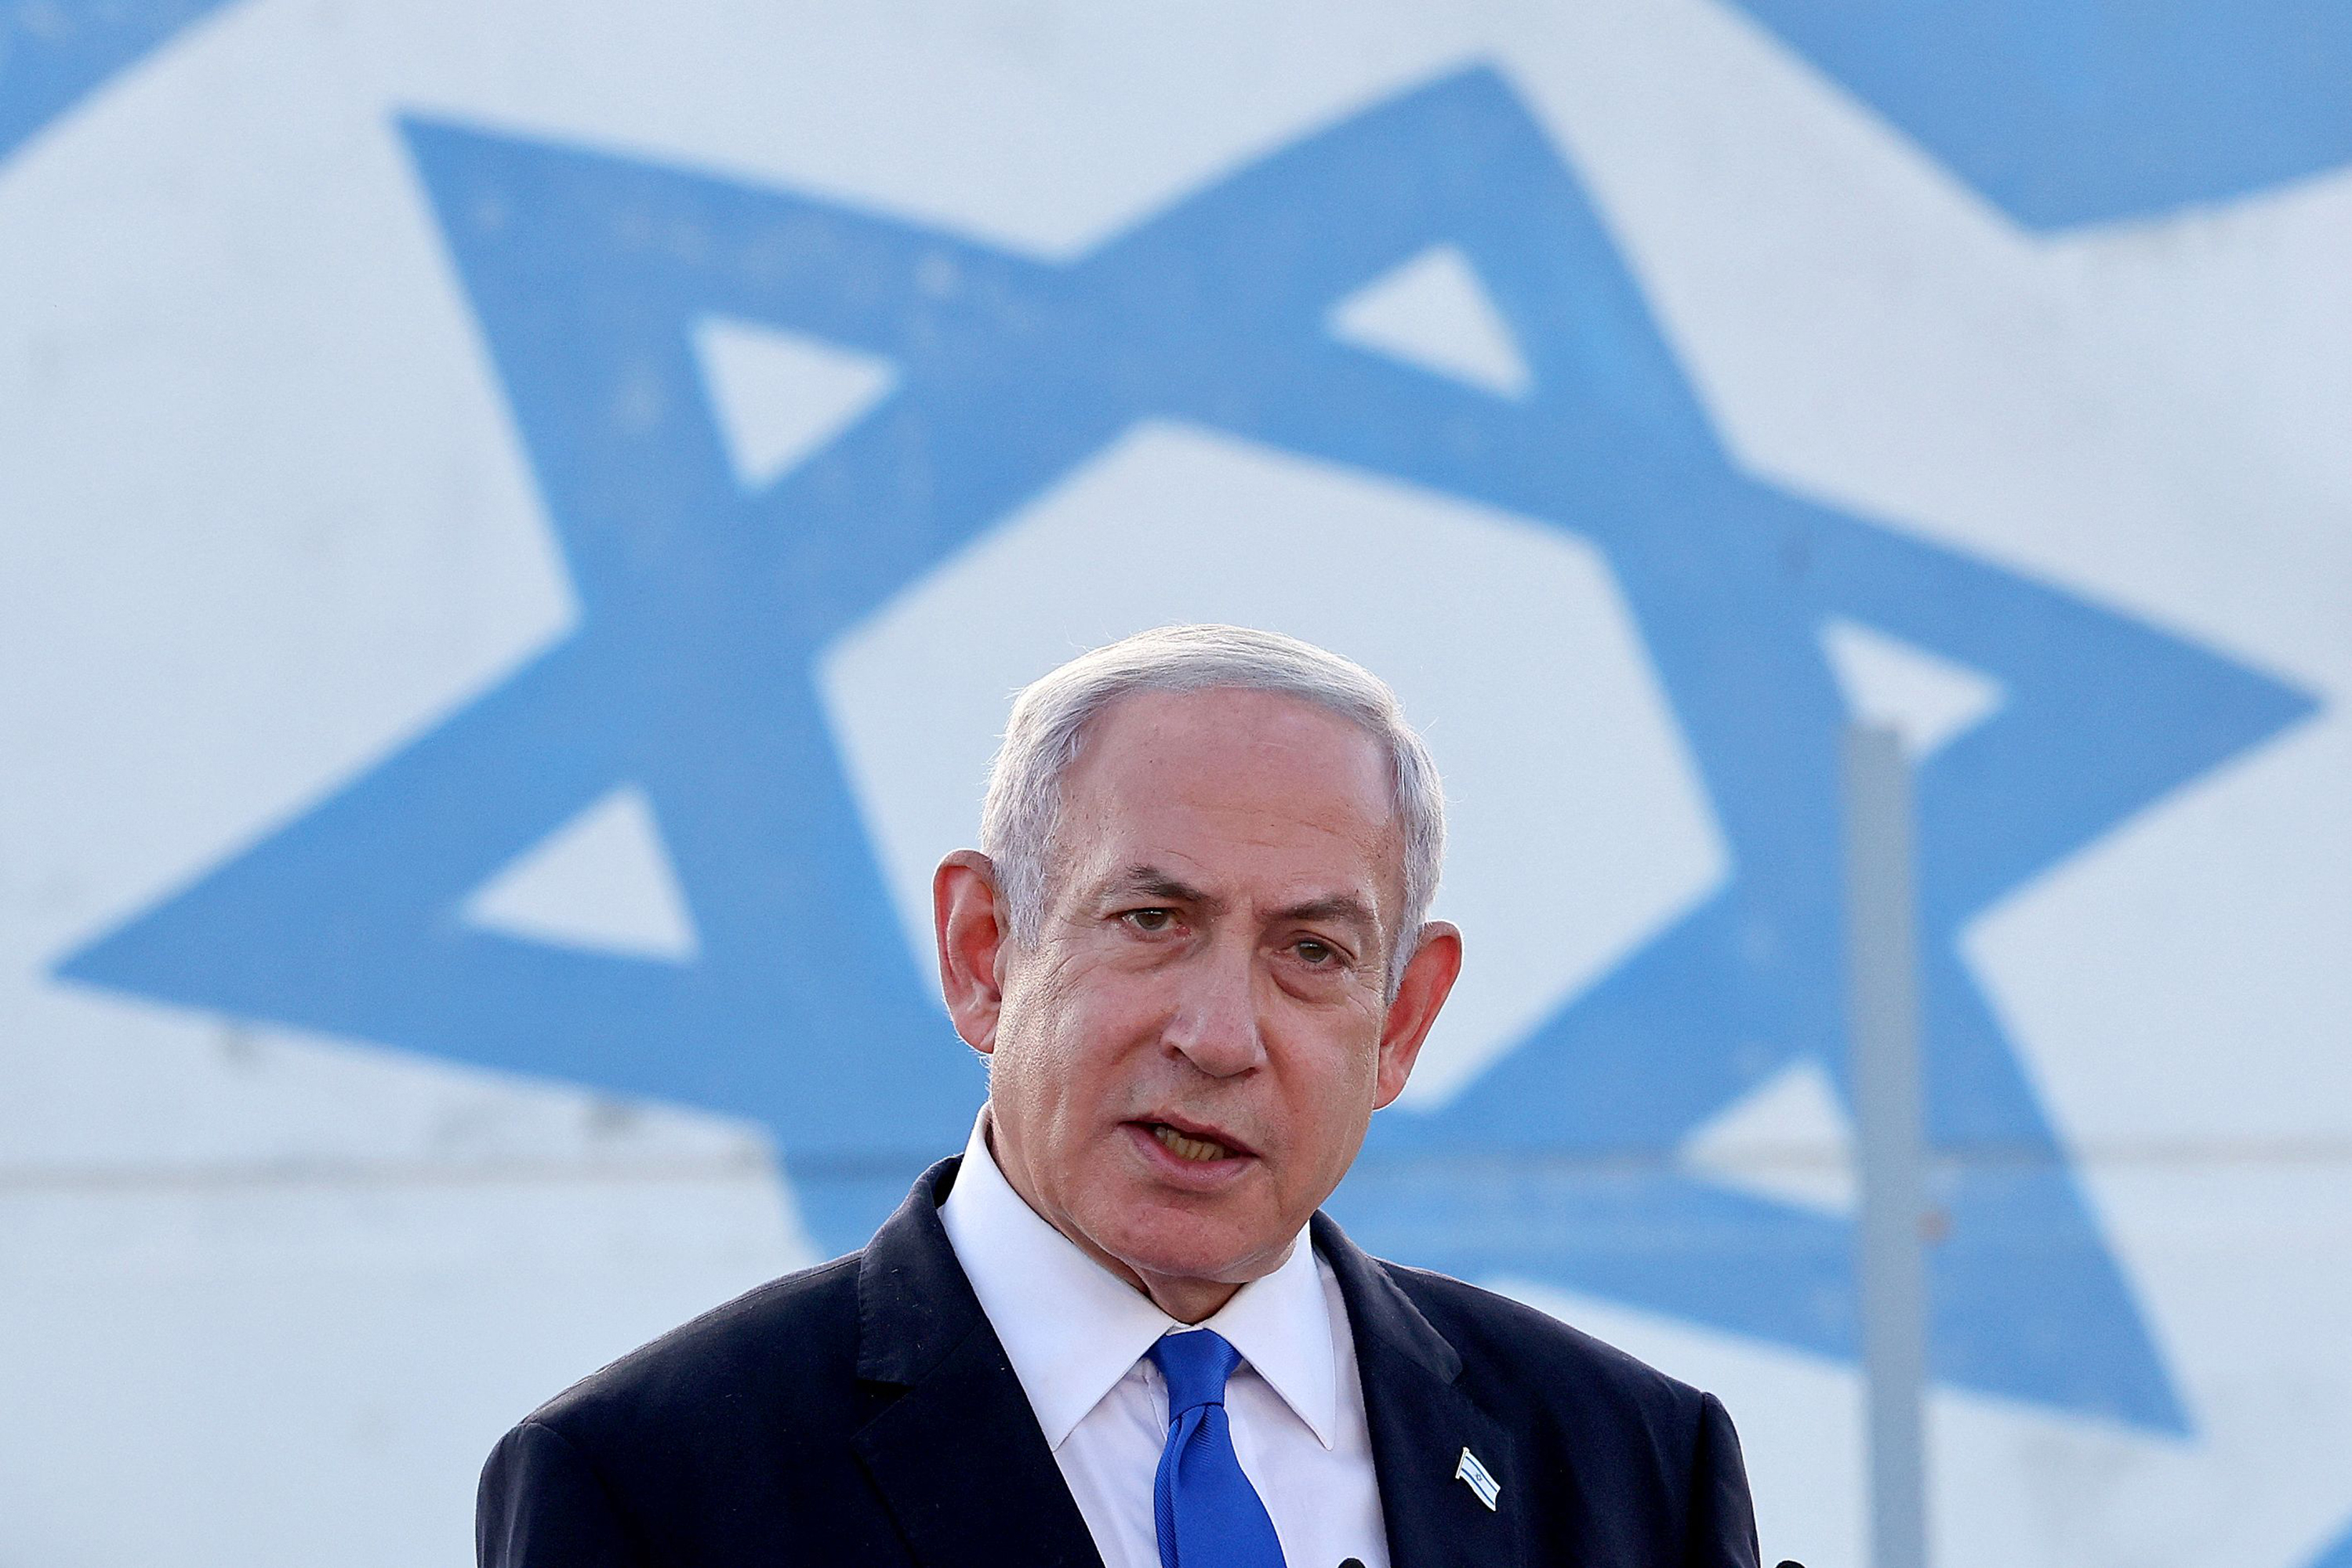 Israeli Prime Minister Benjamin Netanyahu delivers a speech during his visit to an Israeli unmanned aerial vehicle (UAV) centre, at the Palmachim Airbase near the city of Rishon LeZion on July 5.